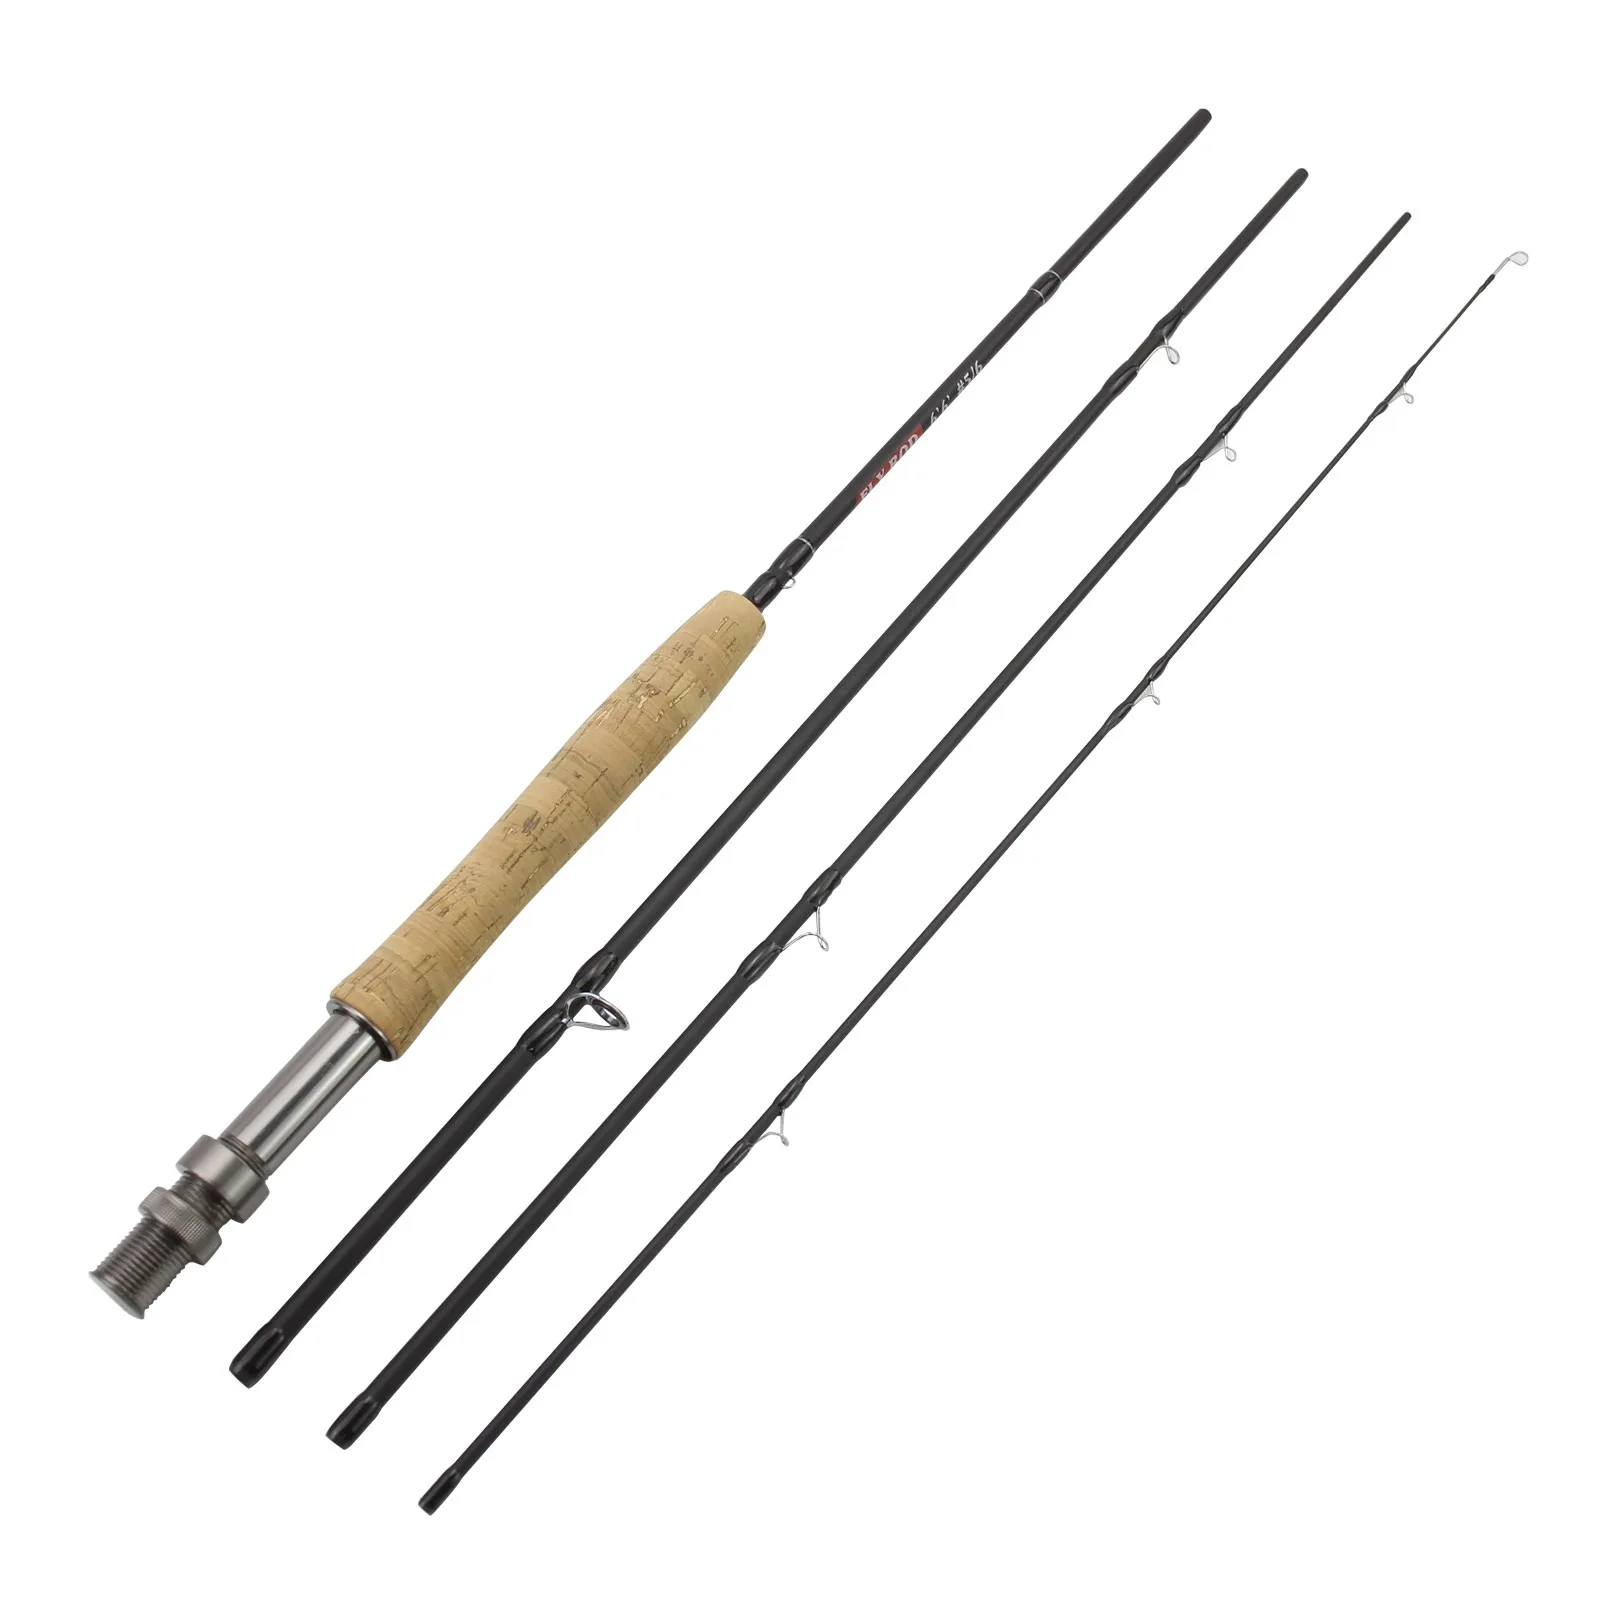 

Jetshark 9 feet 2.7m In Stock Cheap Wholesale Super Light 4 Sections Fishing Rods Tube Fly Fishing Rod